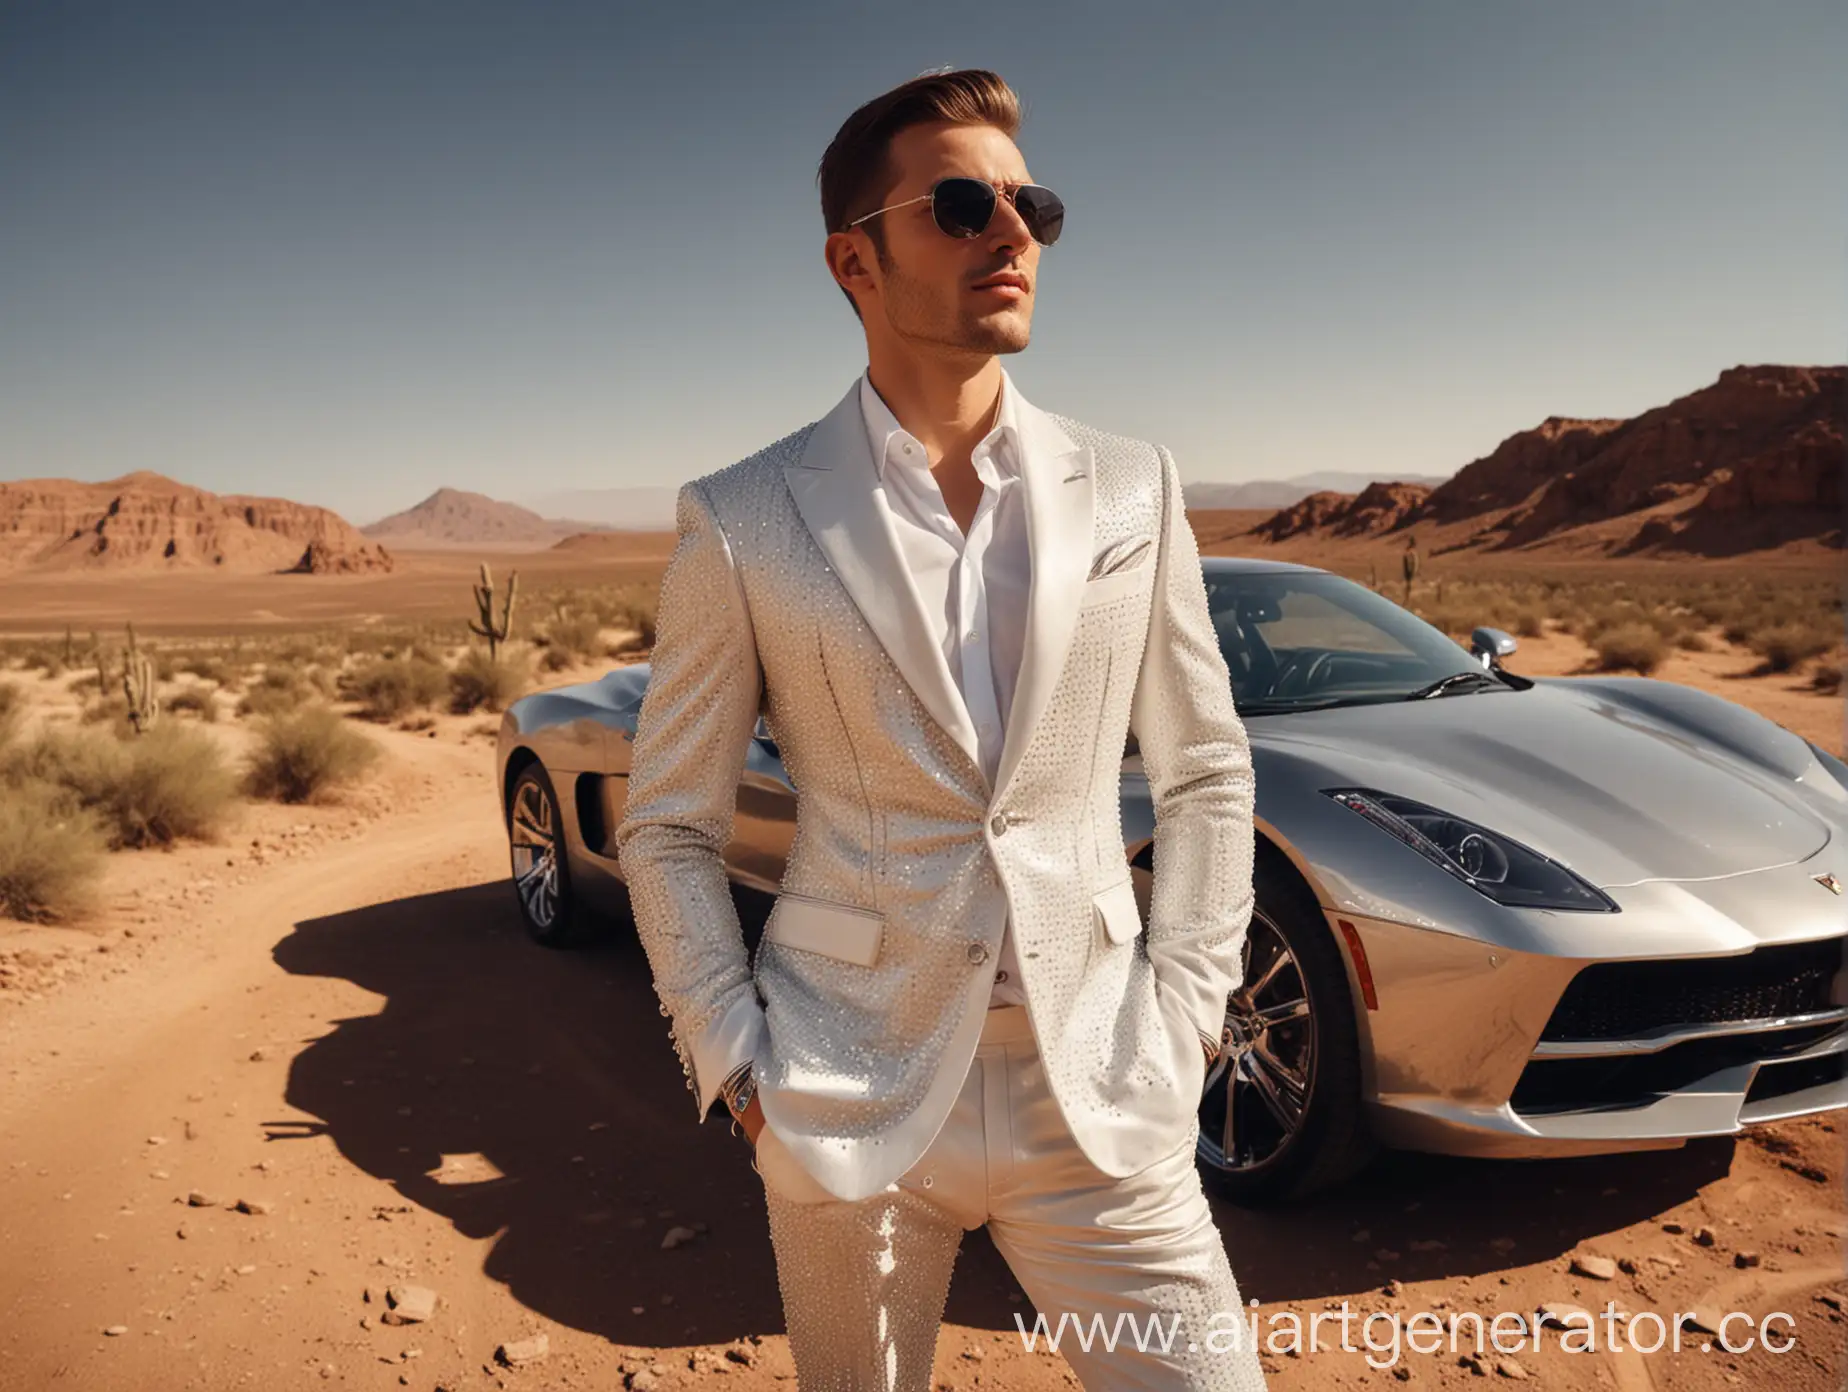 A handsome man in sunglasses dressed in a rhinestone formal suit poses in the desert against the backdrop of a super car